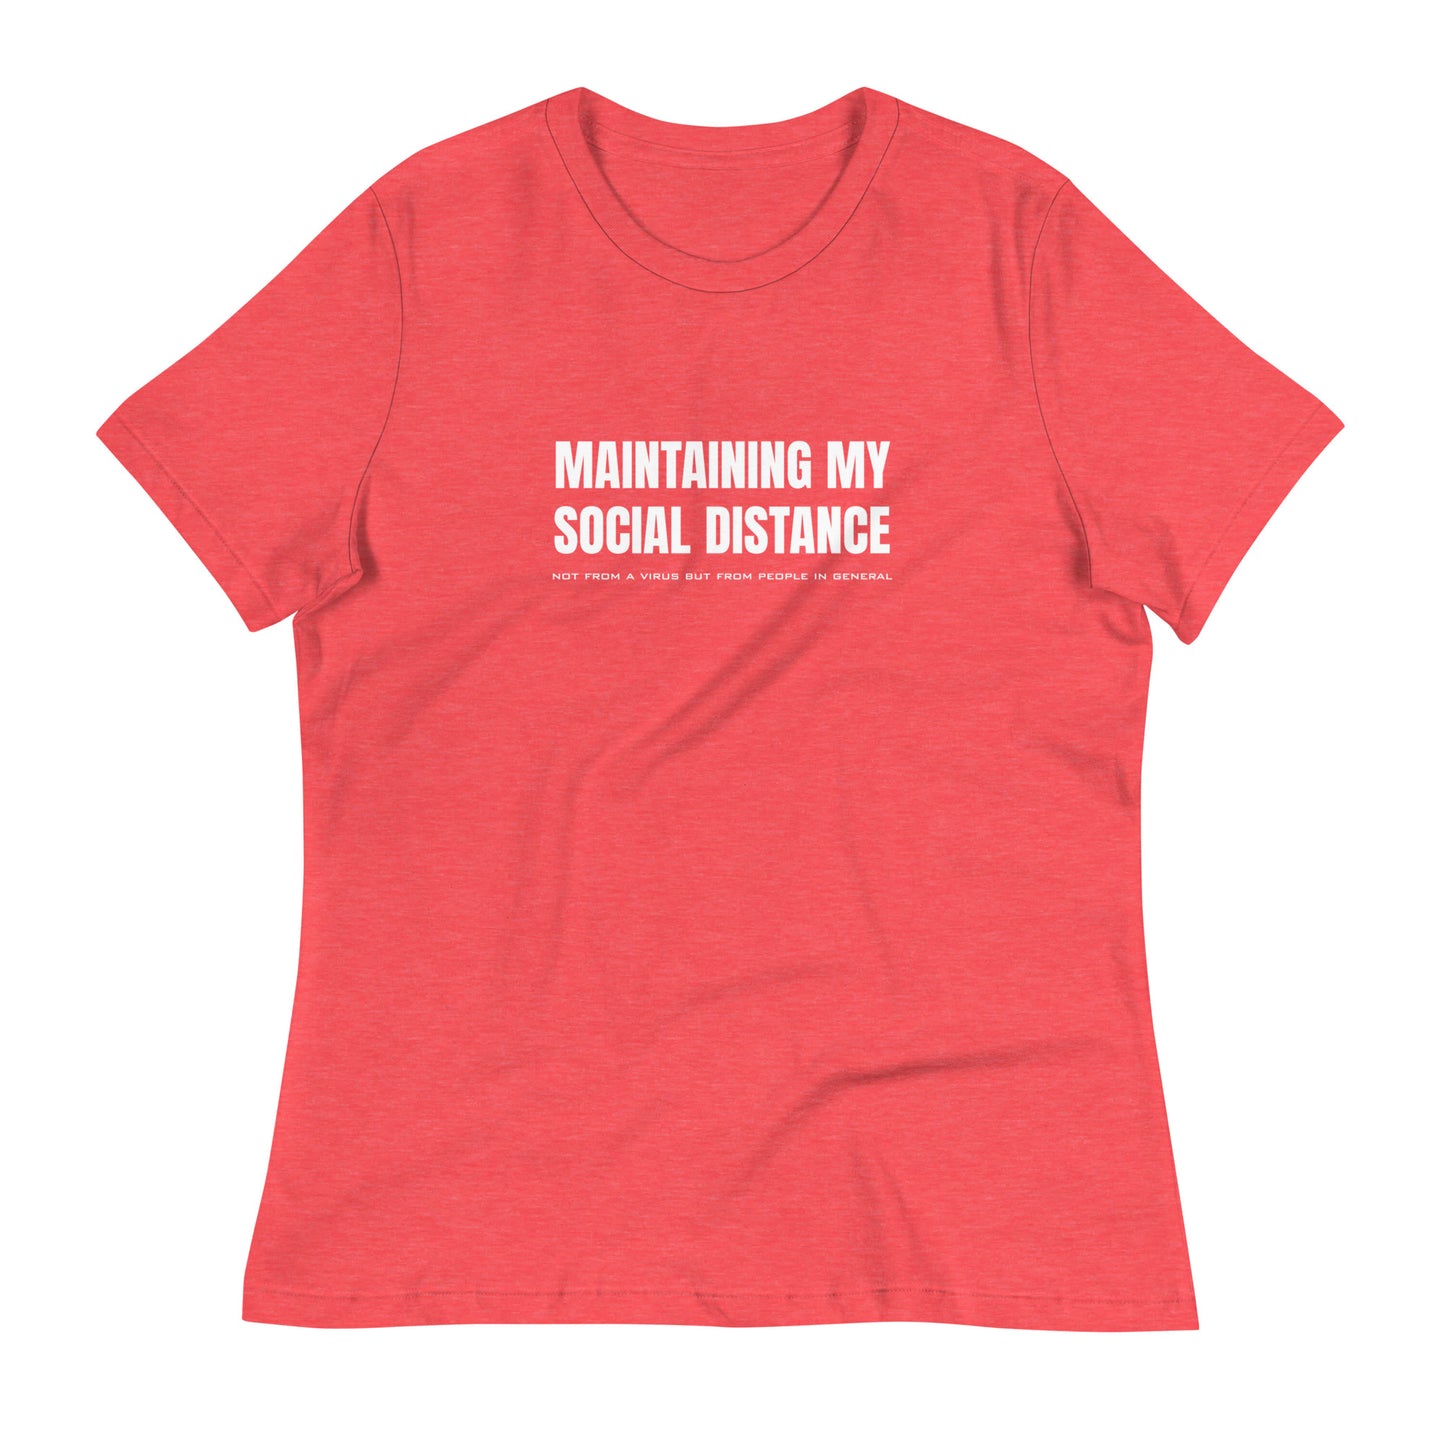 Heather red (coral pink) women's relaxed fit t-shirt with white graphic: "MAINTAINING MY SOCIAL DISTANCE not from a virus but from people in general"